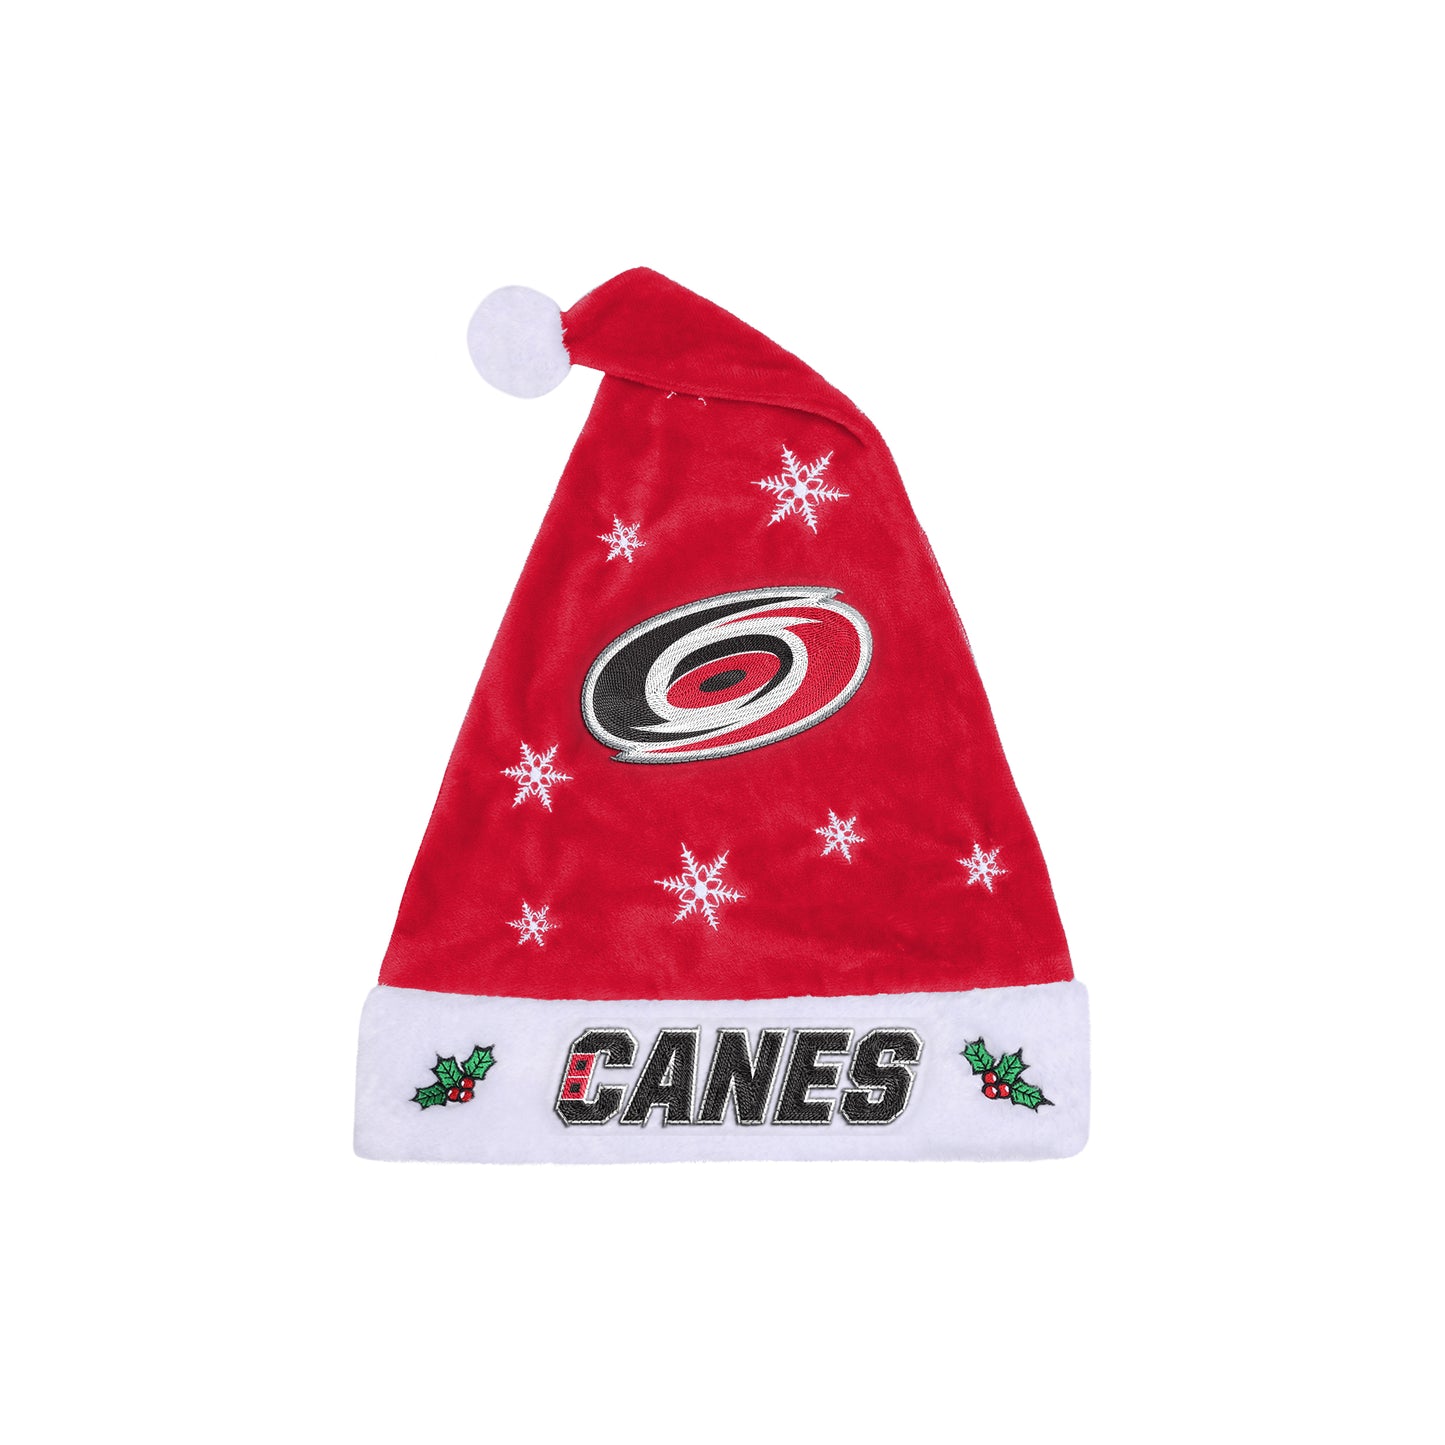 Santa hat with CANES wordmark on cuff, Hurricanes logo and snowflakes on red portion